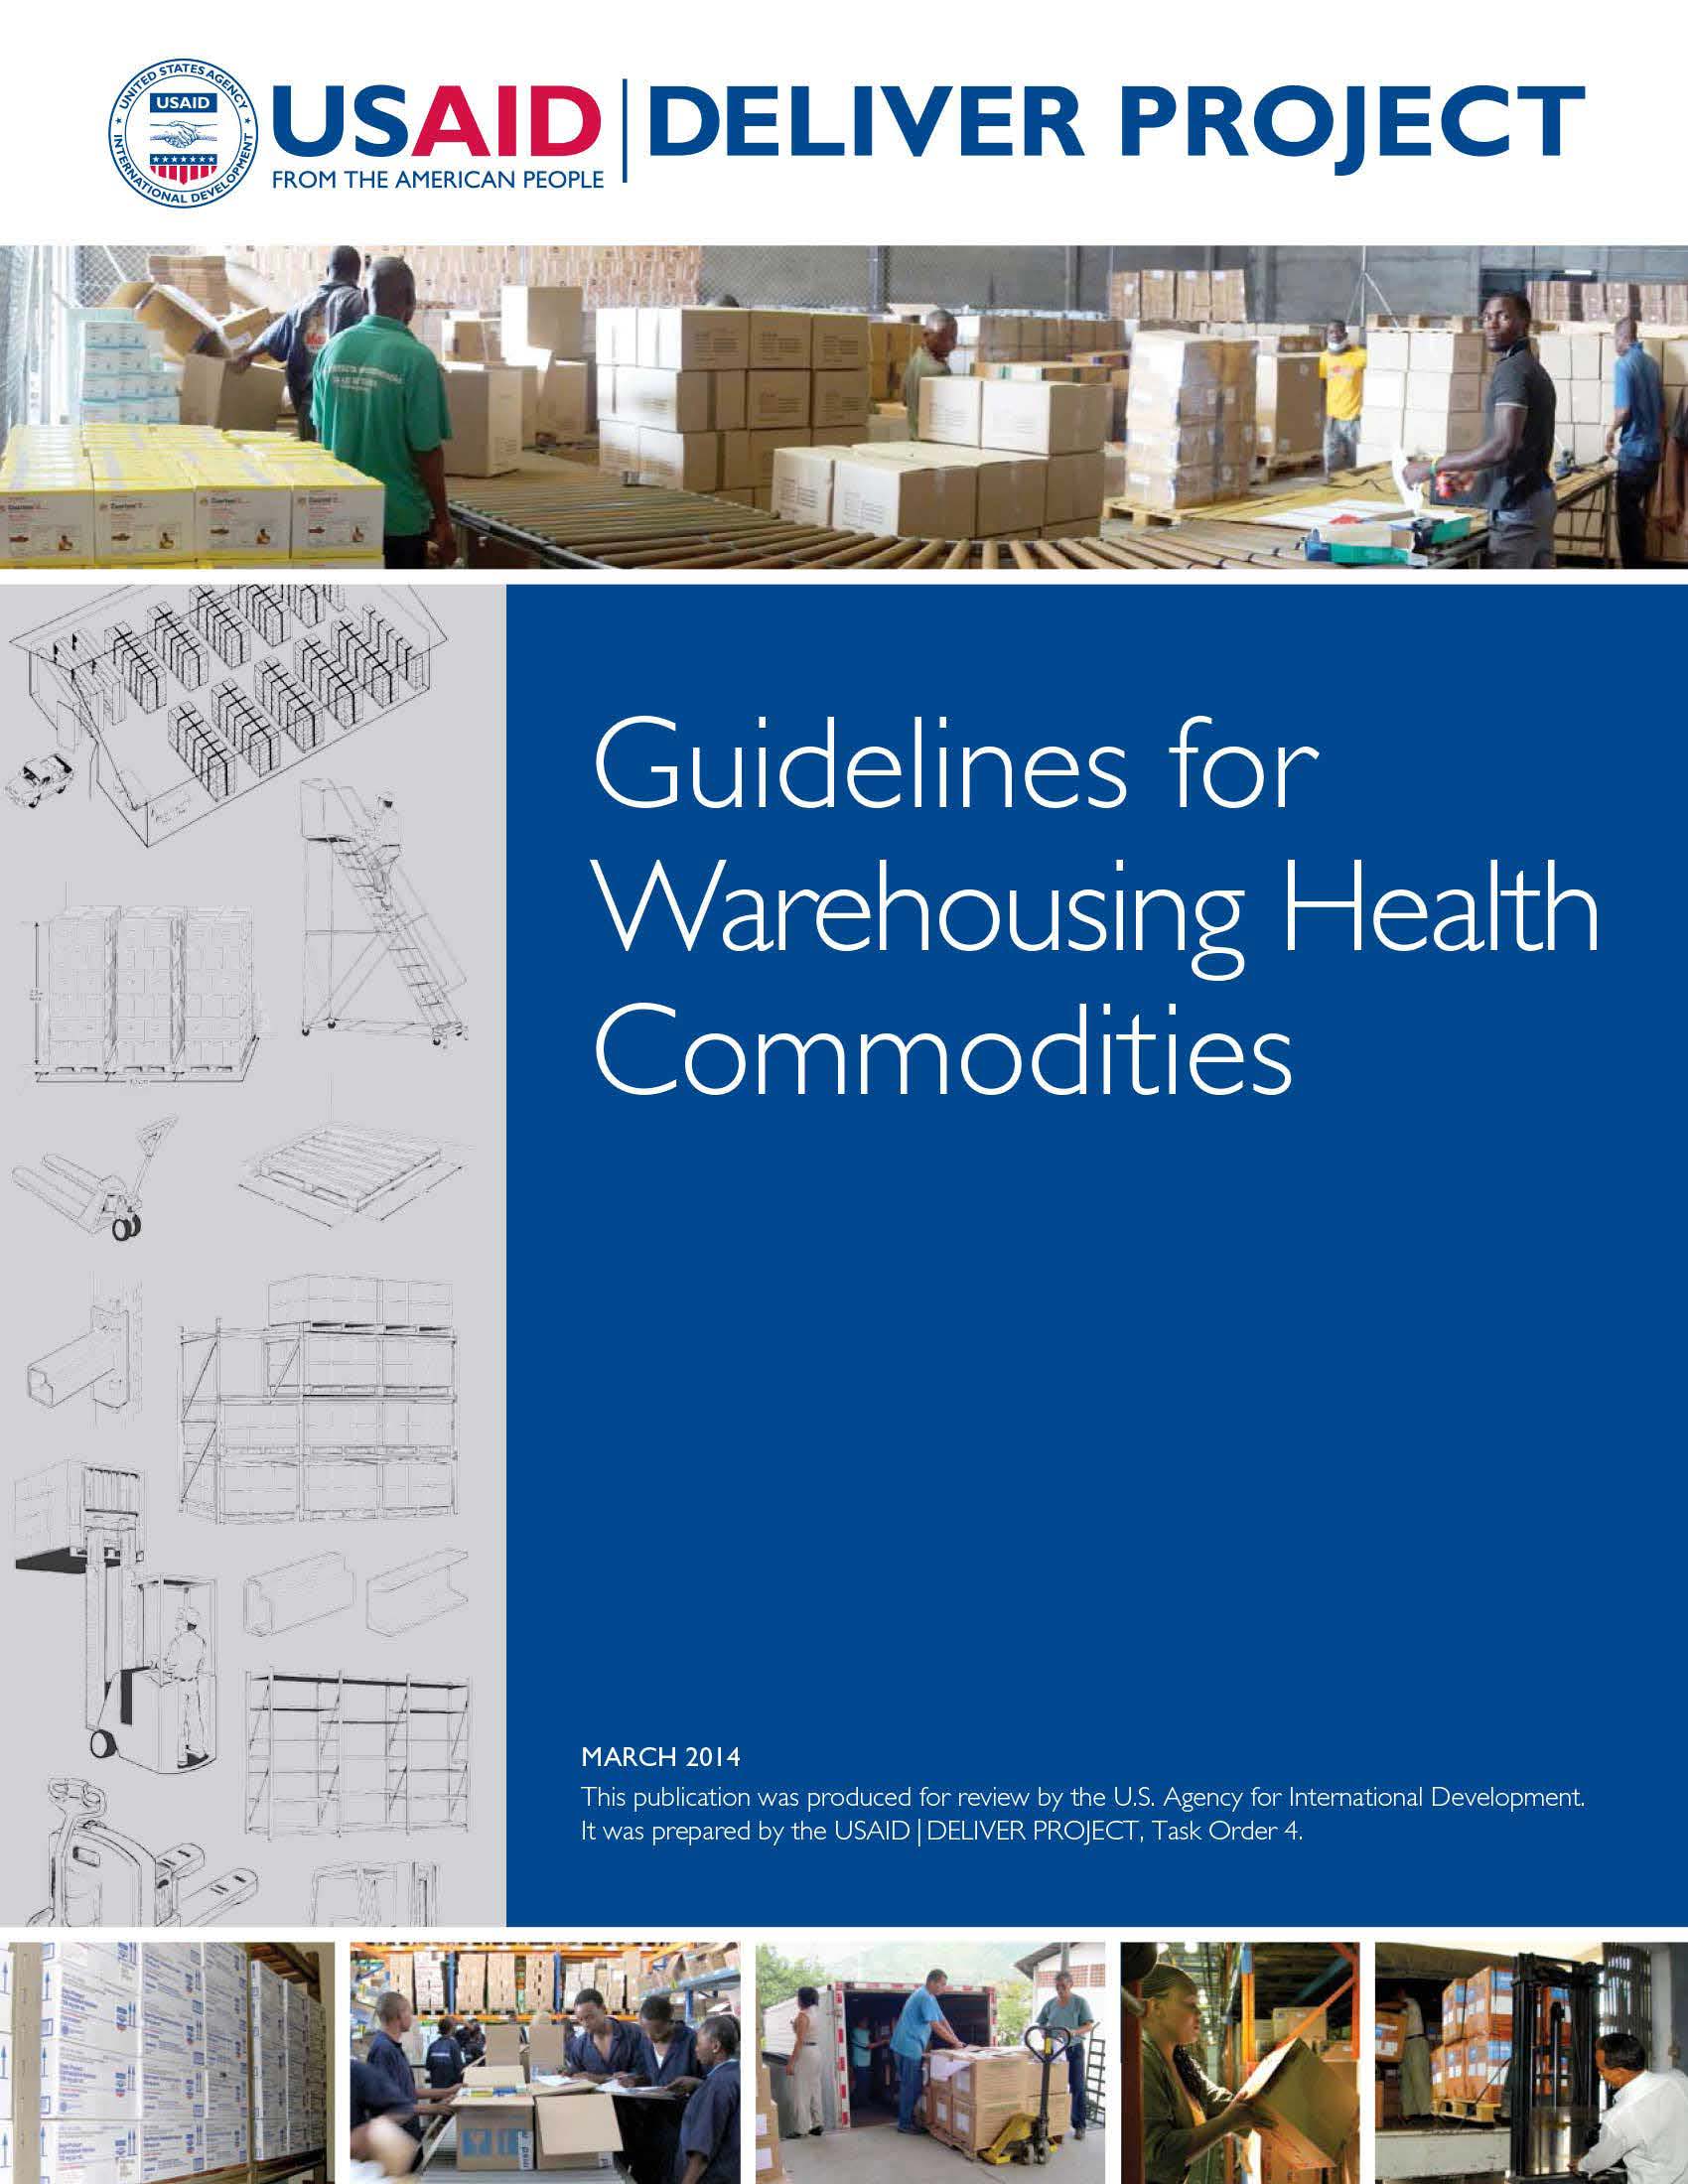 Cover for the Guidelines for Warehousing Health Commodities